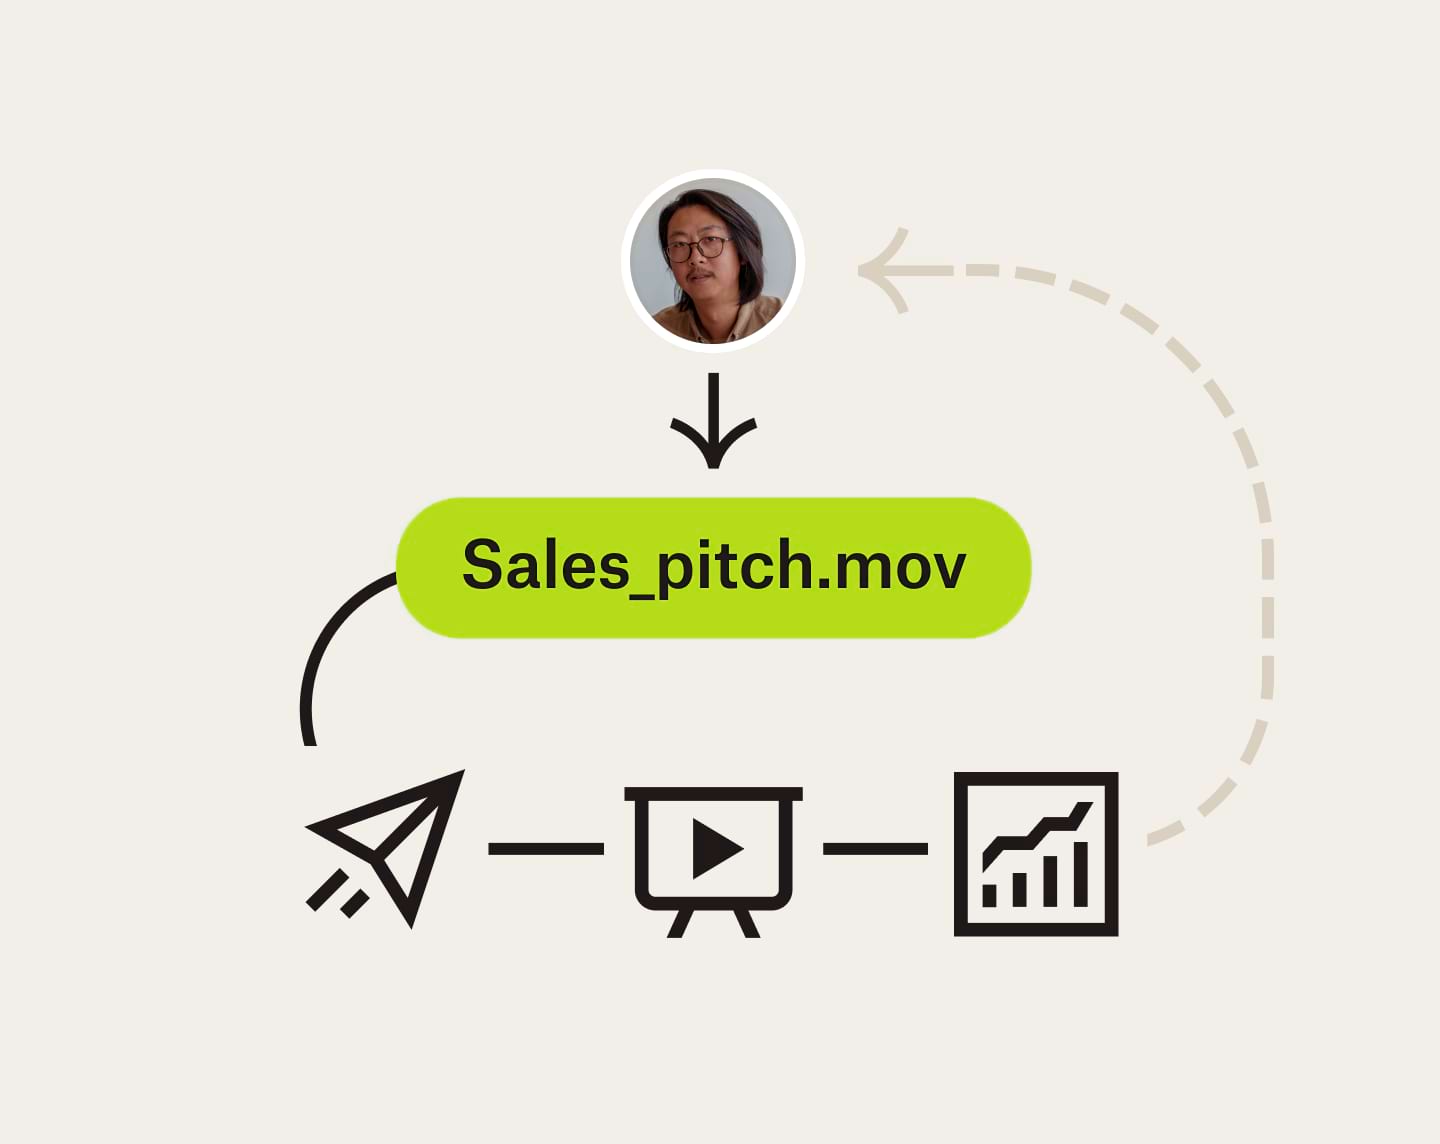 A flowchart that shows how a sales pitch video can be sent, viewed and help with business growth.